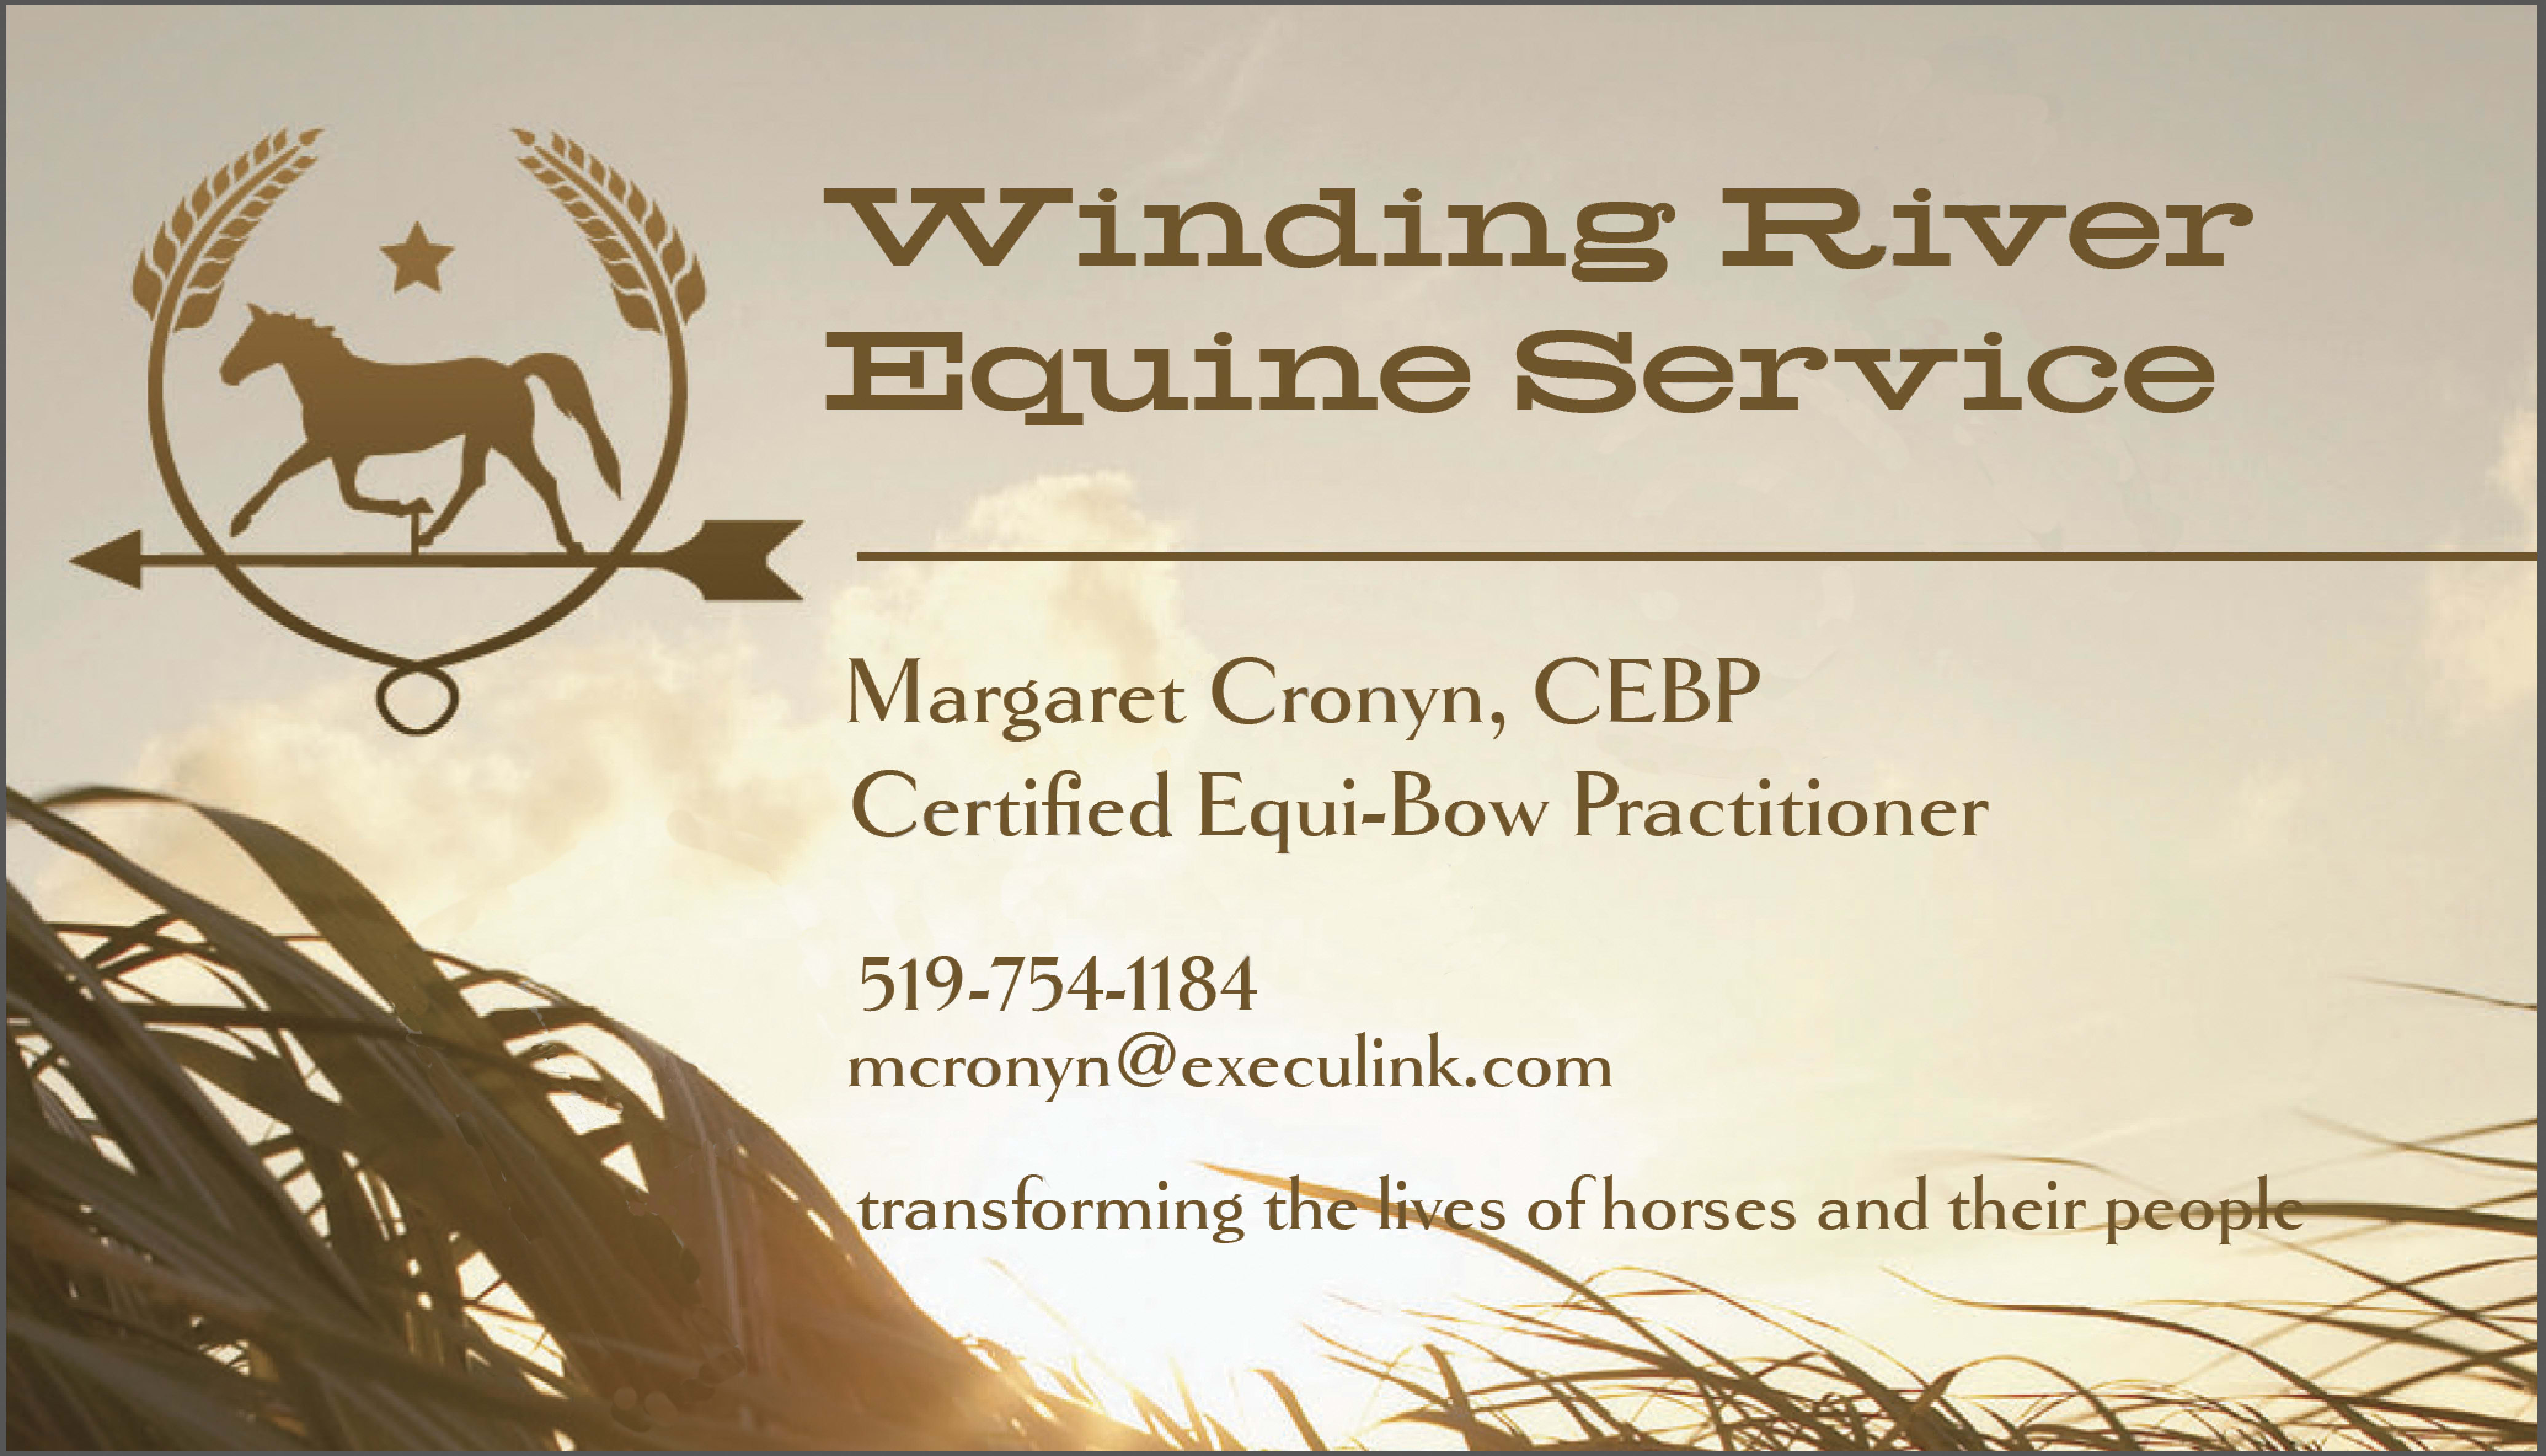 Winding River Equine Service